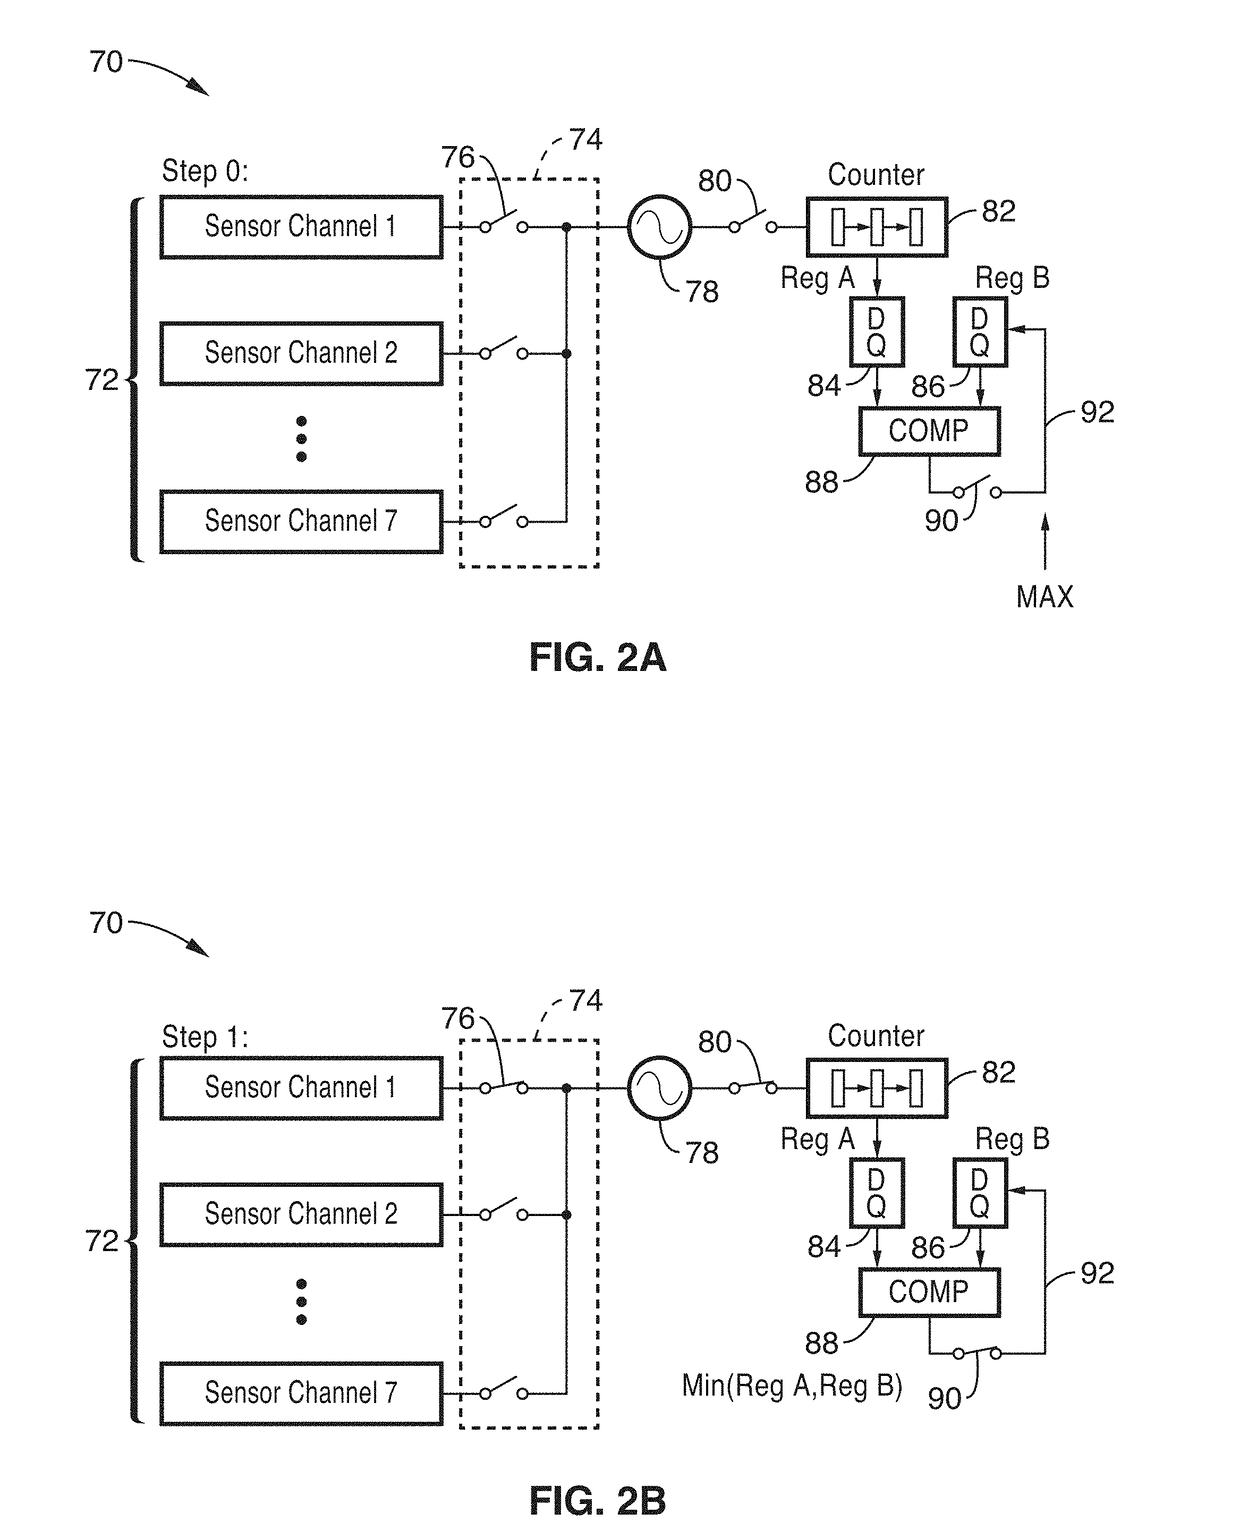 Bootstrapped and correlated double sampling (BCDS) non-contact touch sensor for mobile devices